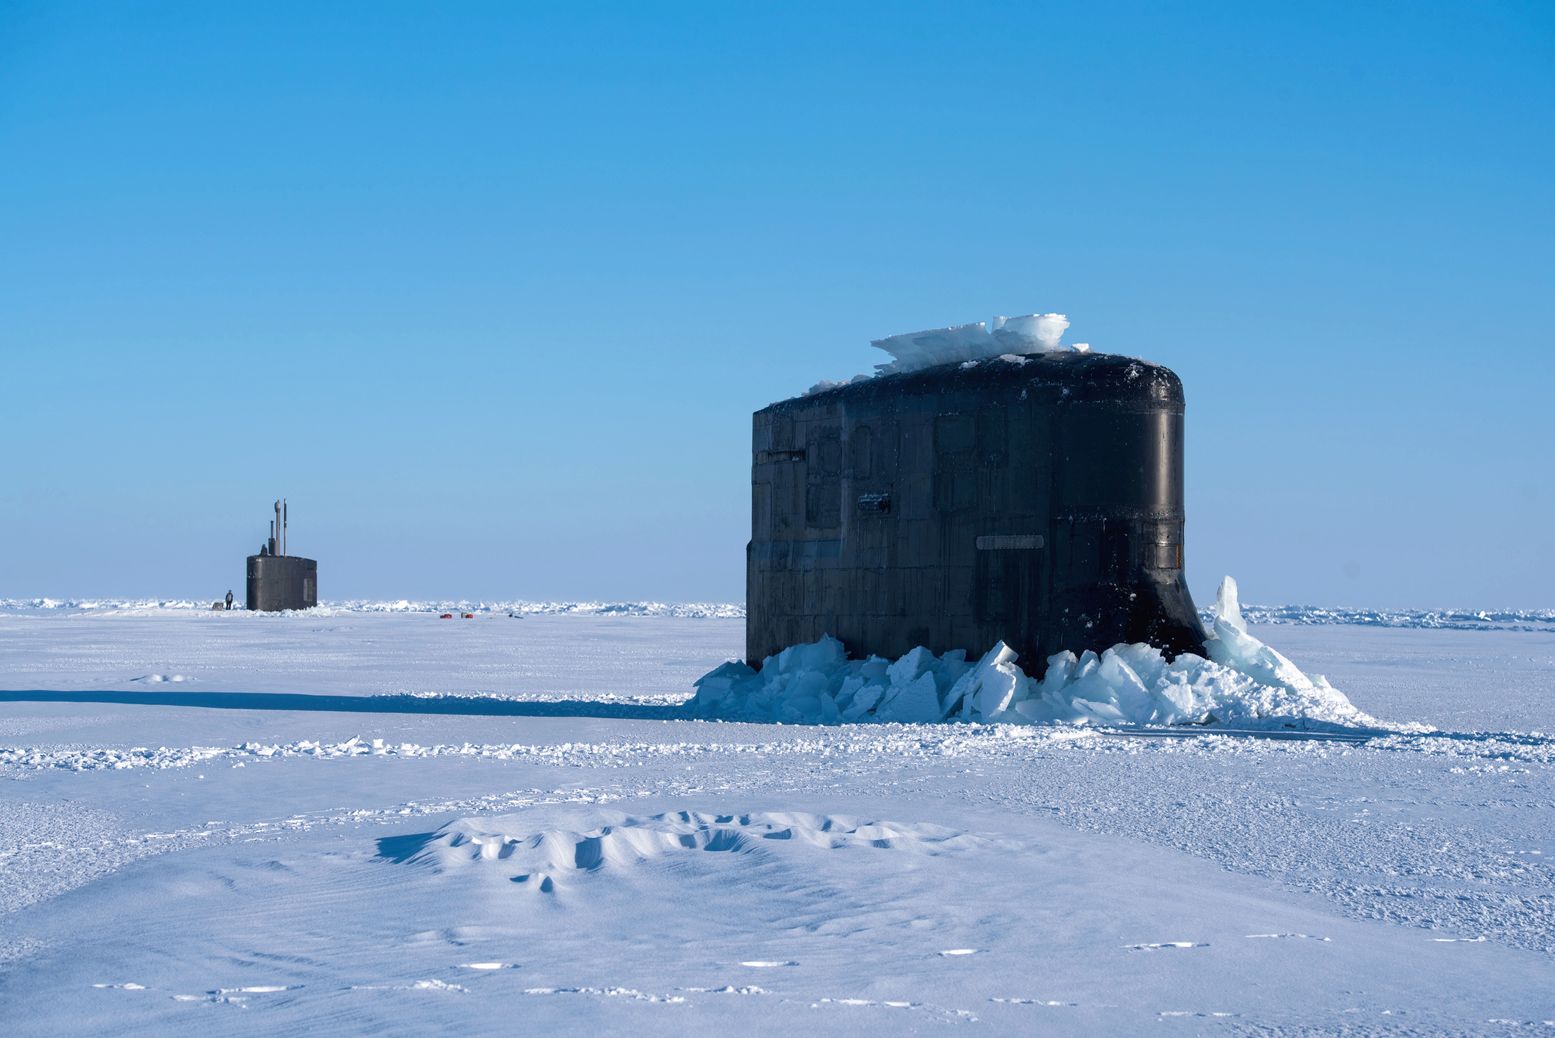 A thawing Arctic is heating up a new Cold War